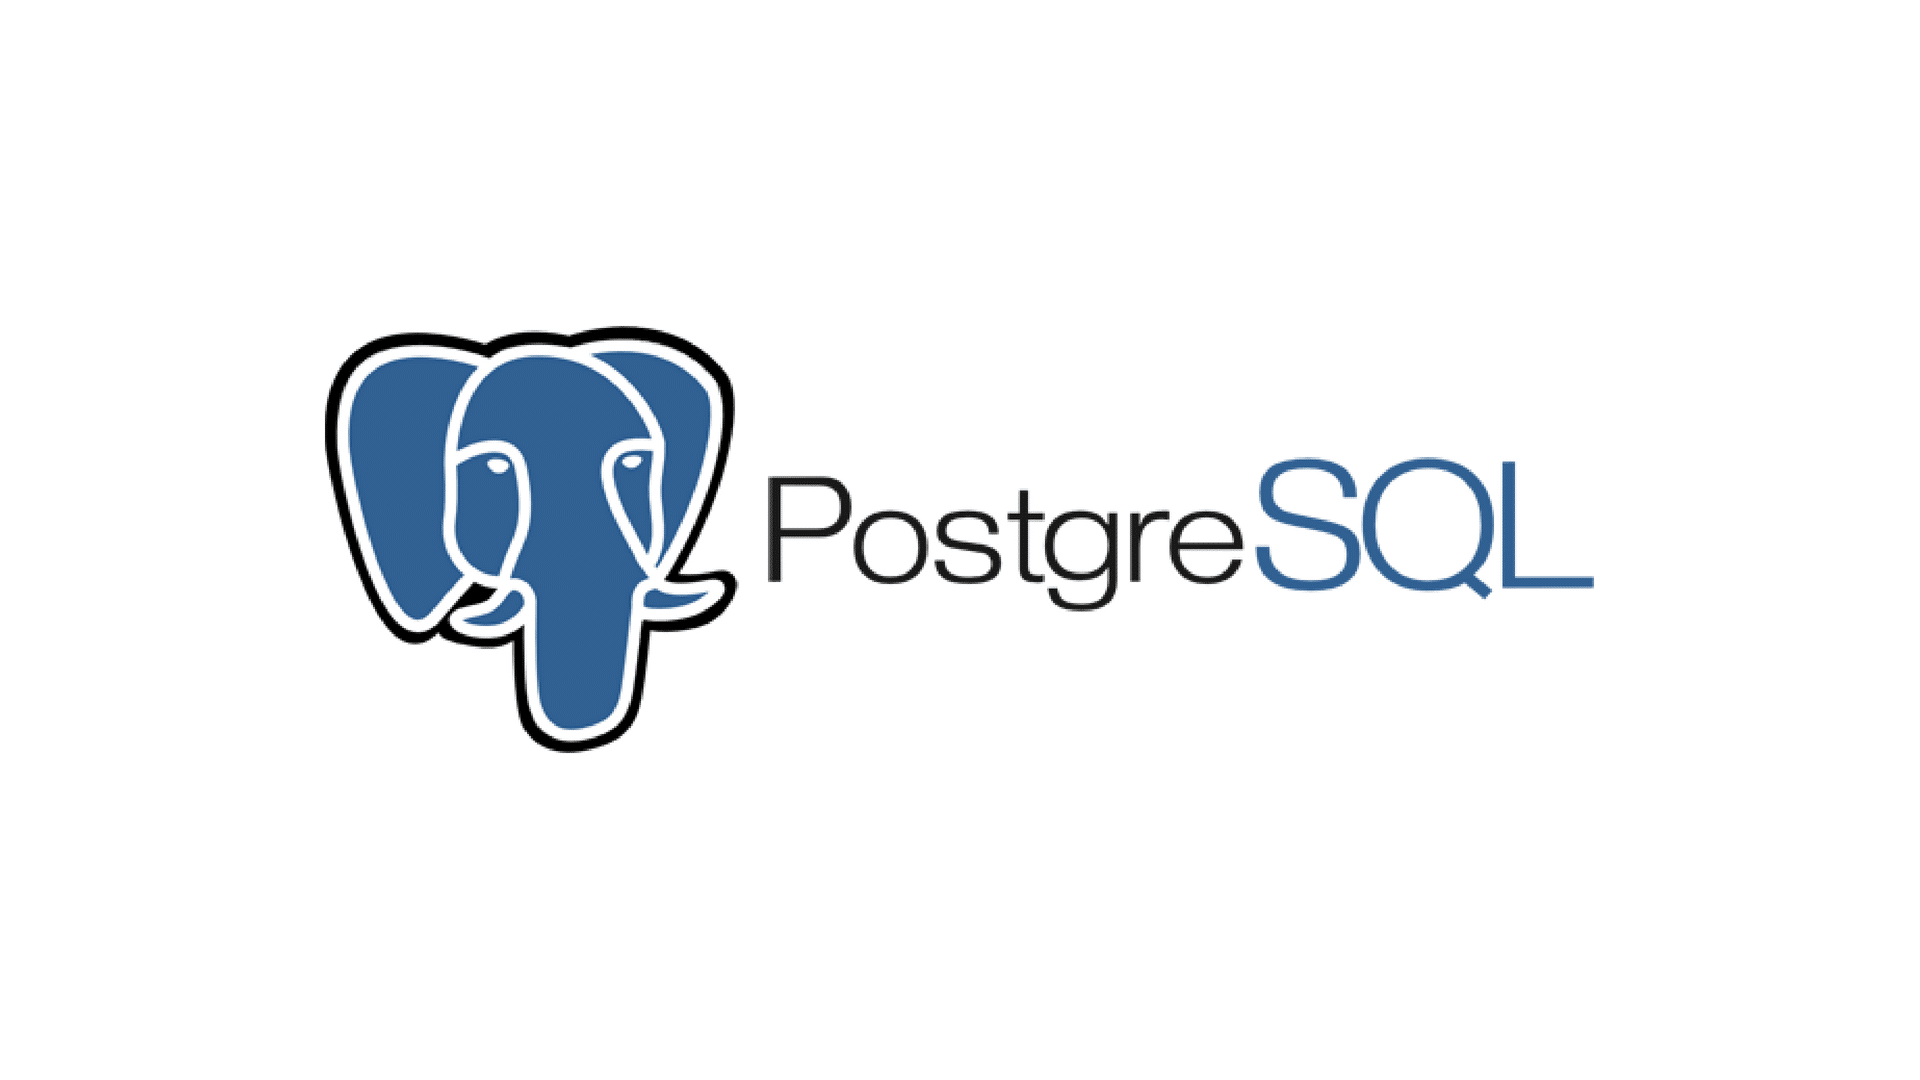 The PostgreSQL logo, showing the text below a stylized blue elephant head outlined in black and white.